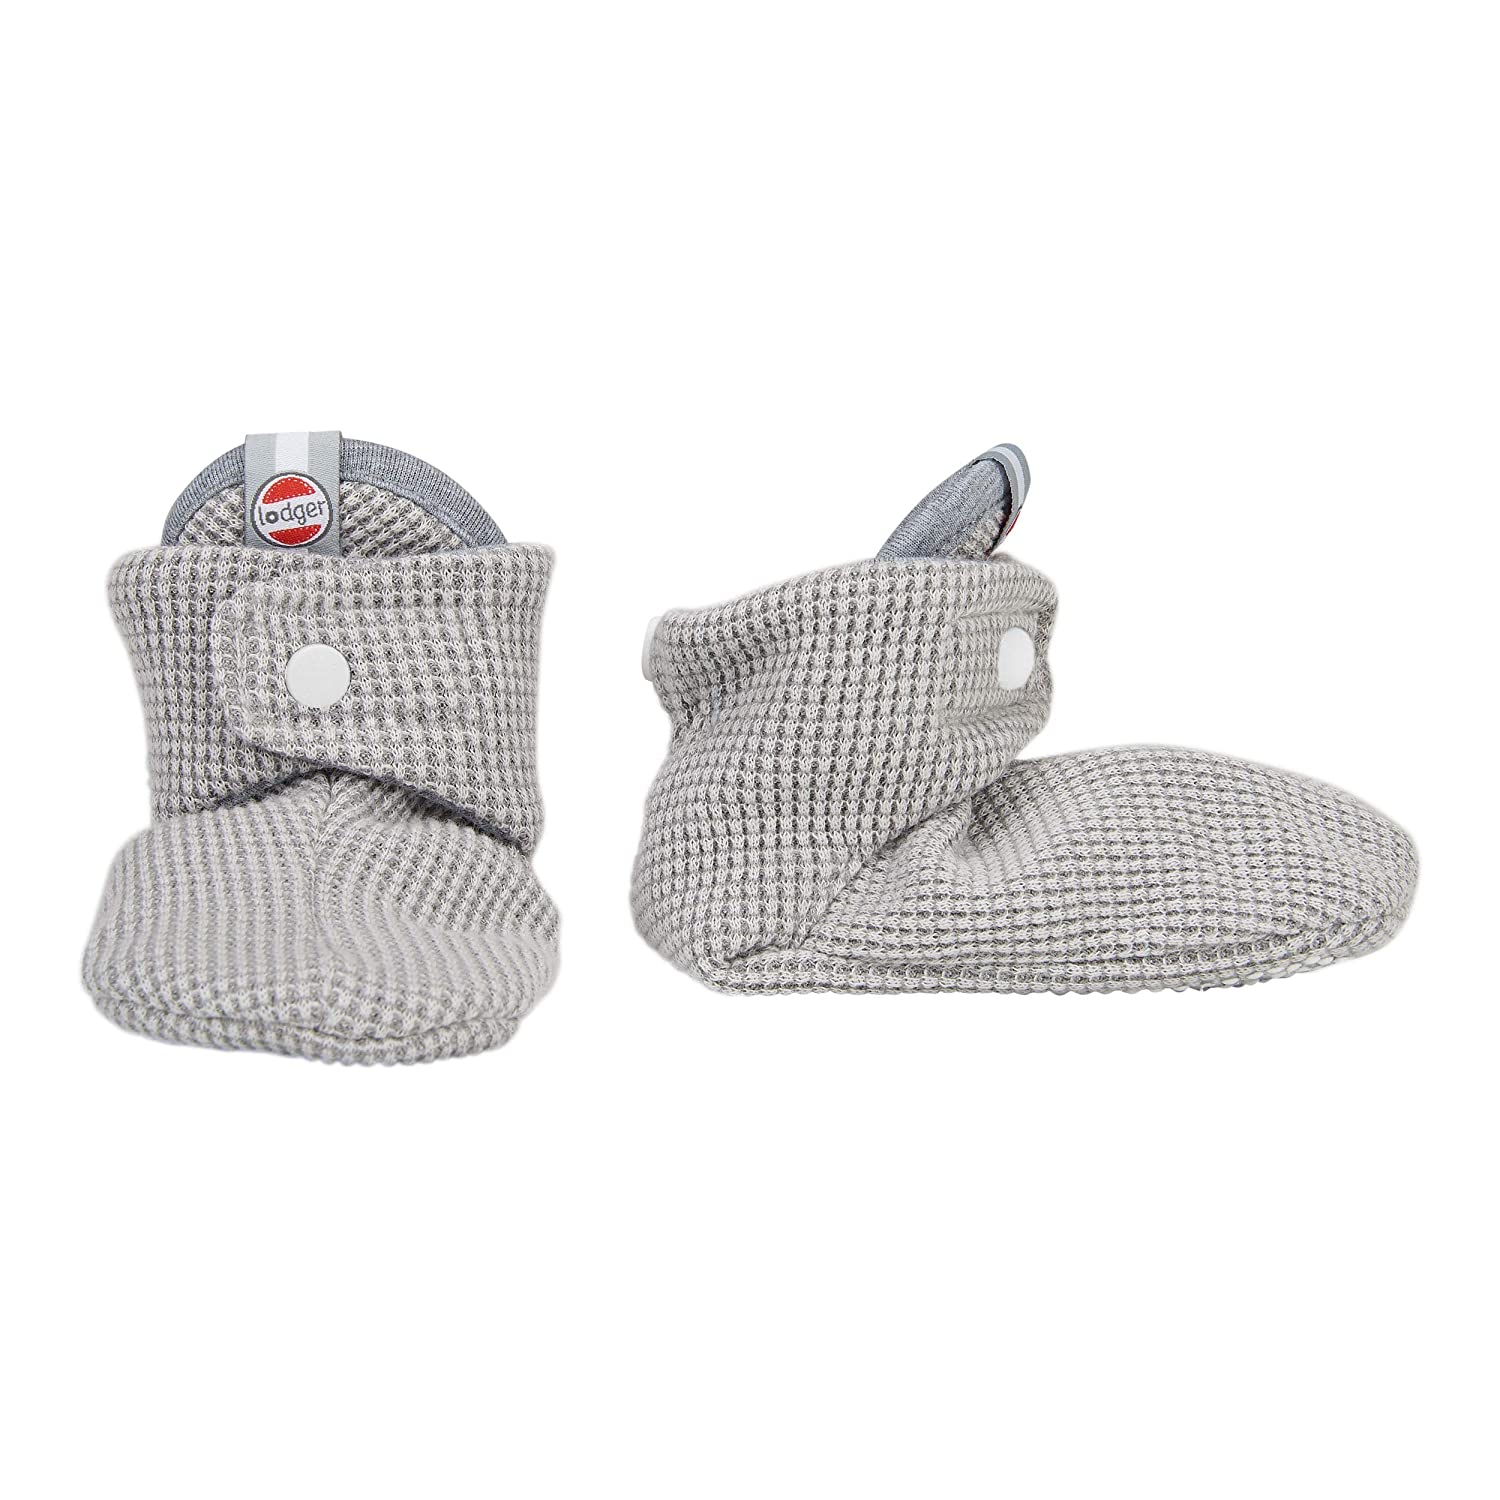 Lodger SL11.1.06.003 078 0 Crawling Shoes Cotton Slippers Ciumbelle - 0-3 Months, S, Grey